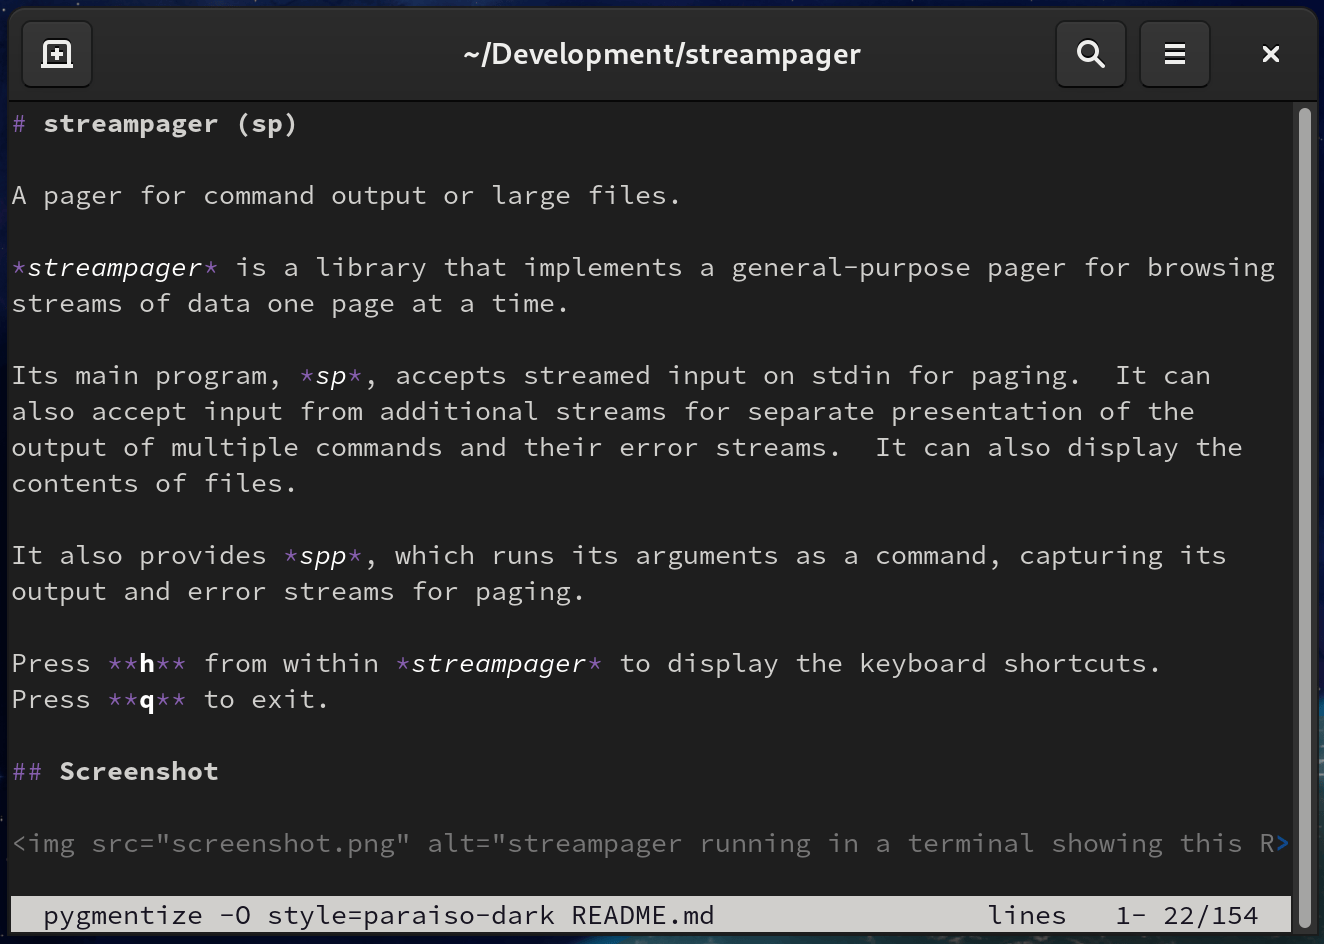 streampager running in a terminal showing this README file